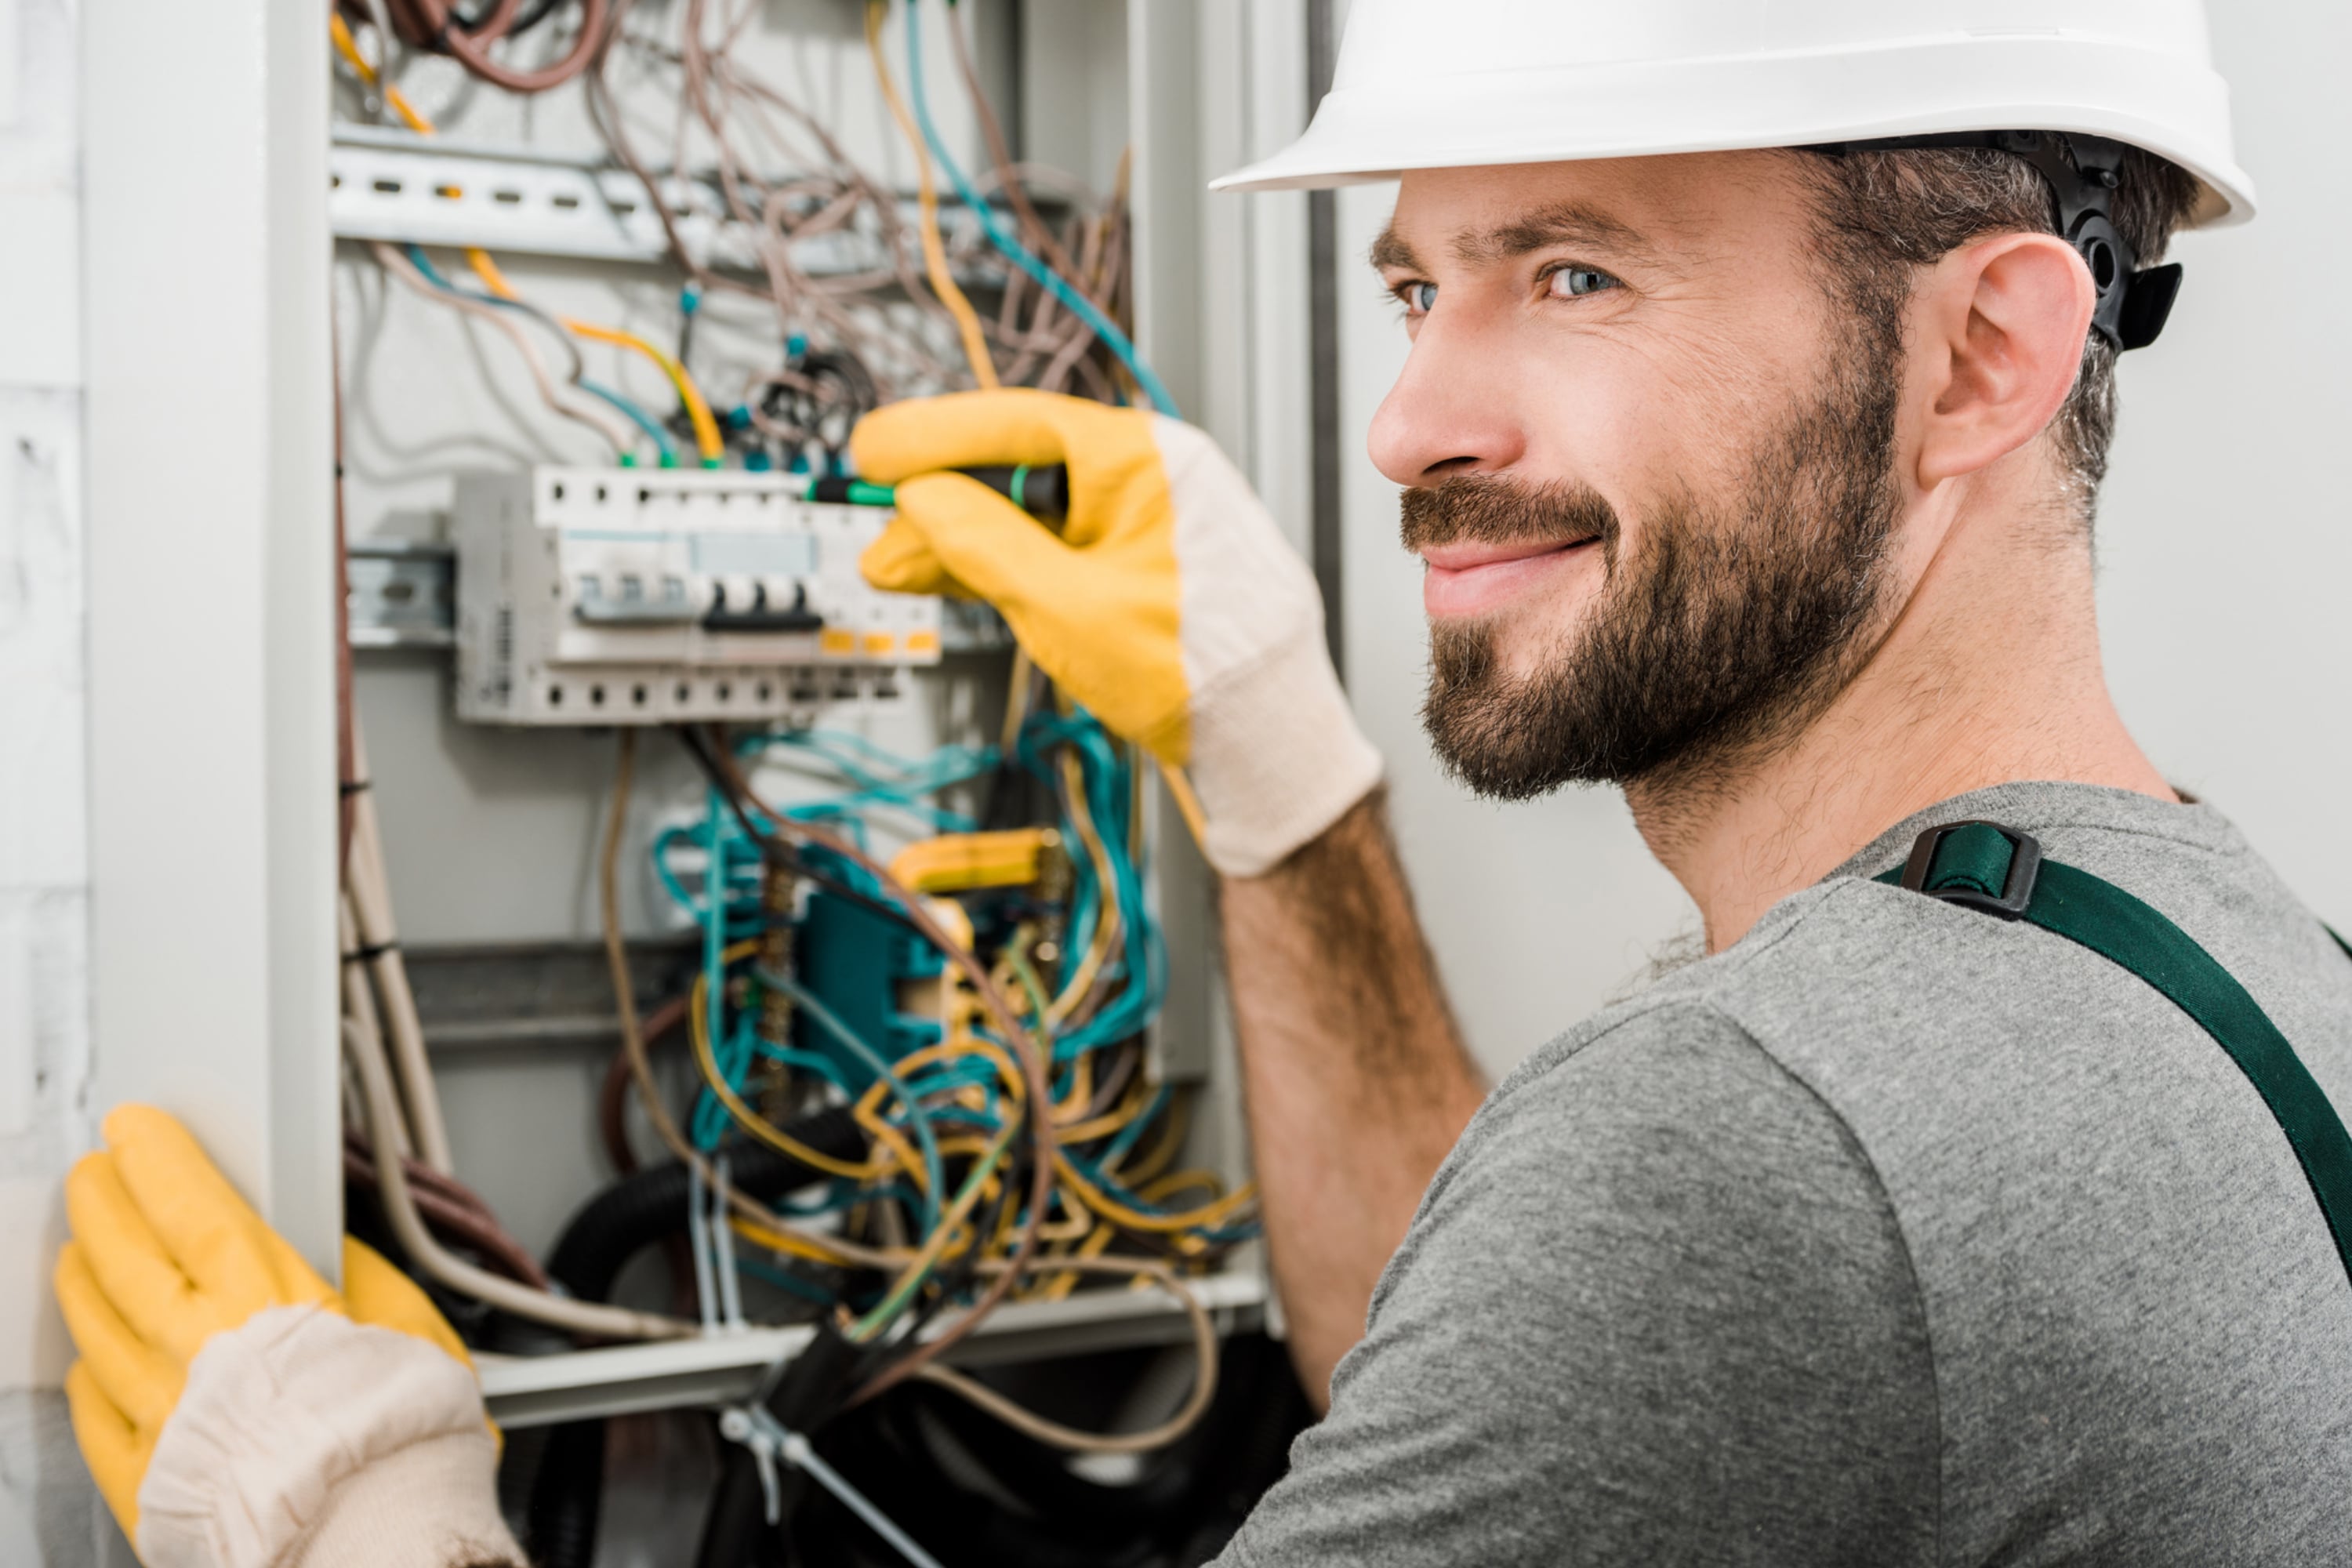 1. Conduct electrical maintenance for your property